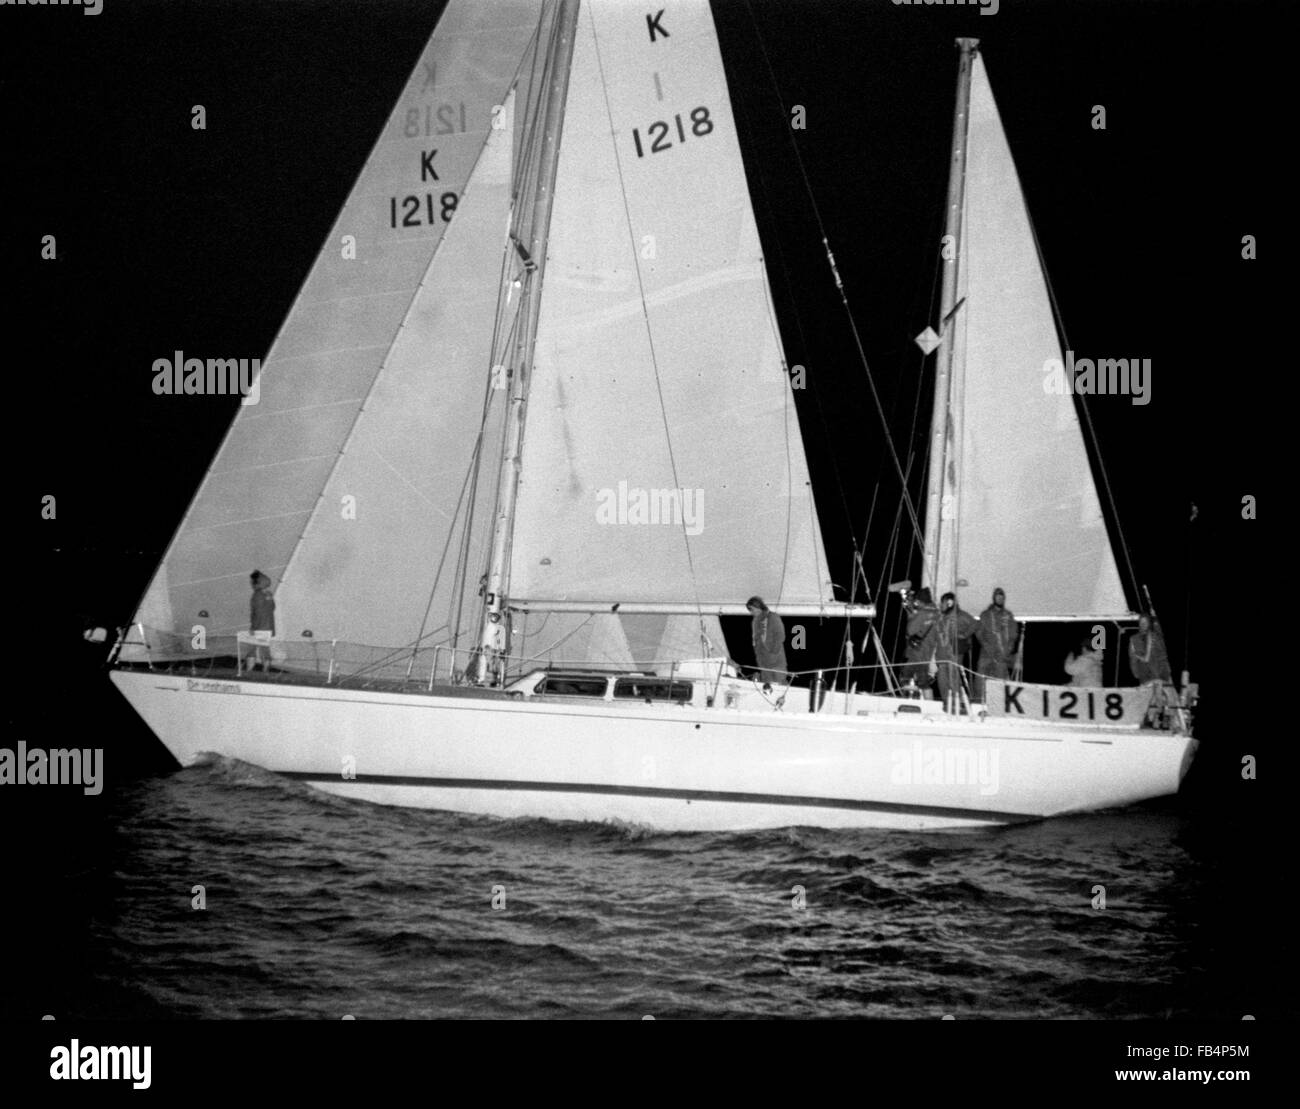 AJAX NEWS PHOTOS.1978. PORTSMOUTH, ENGLAND. - WHITBREAD WORLD RACE END - THE BRITISH YACHT DEBENHAMS SKIPPERED BY JOHN RIDGWAY CROSSES THE FINISH LINE OF THE 4TH LEG, THE LAST YACHT IN THE RACE TO COMPLETE THE COURSE.  PHOTO:JONATHAN EASTLAND/AJAX REF:HDD DEBENHAMS 1978 002 Stock Photo